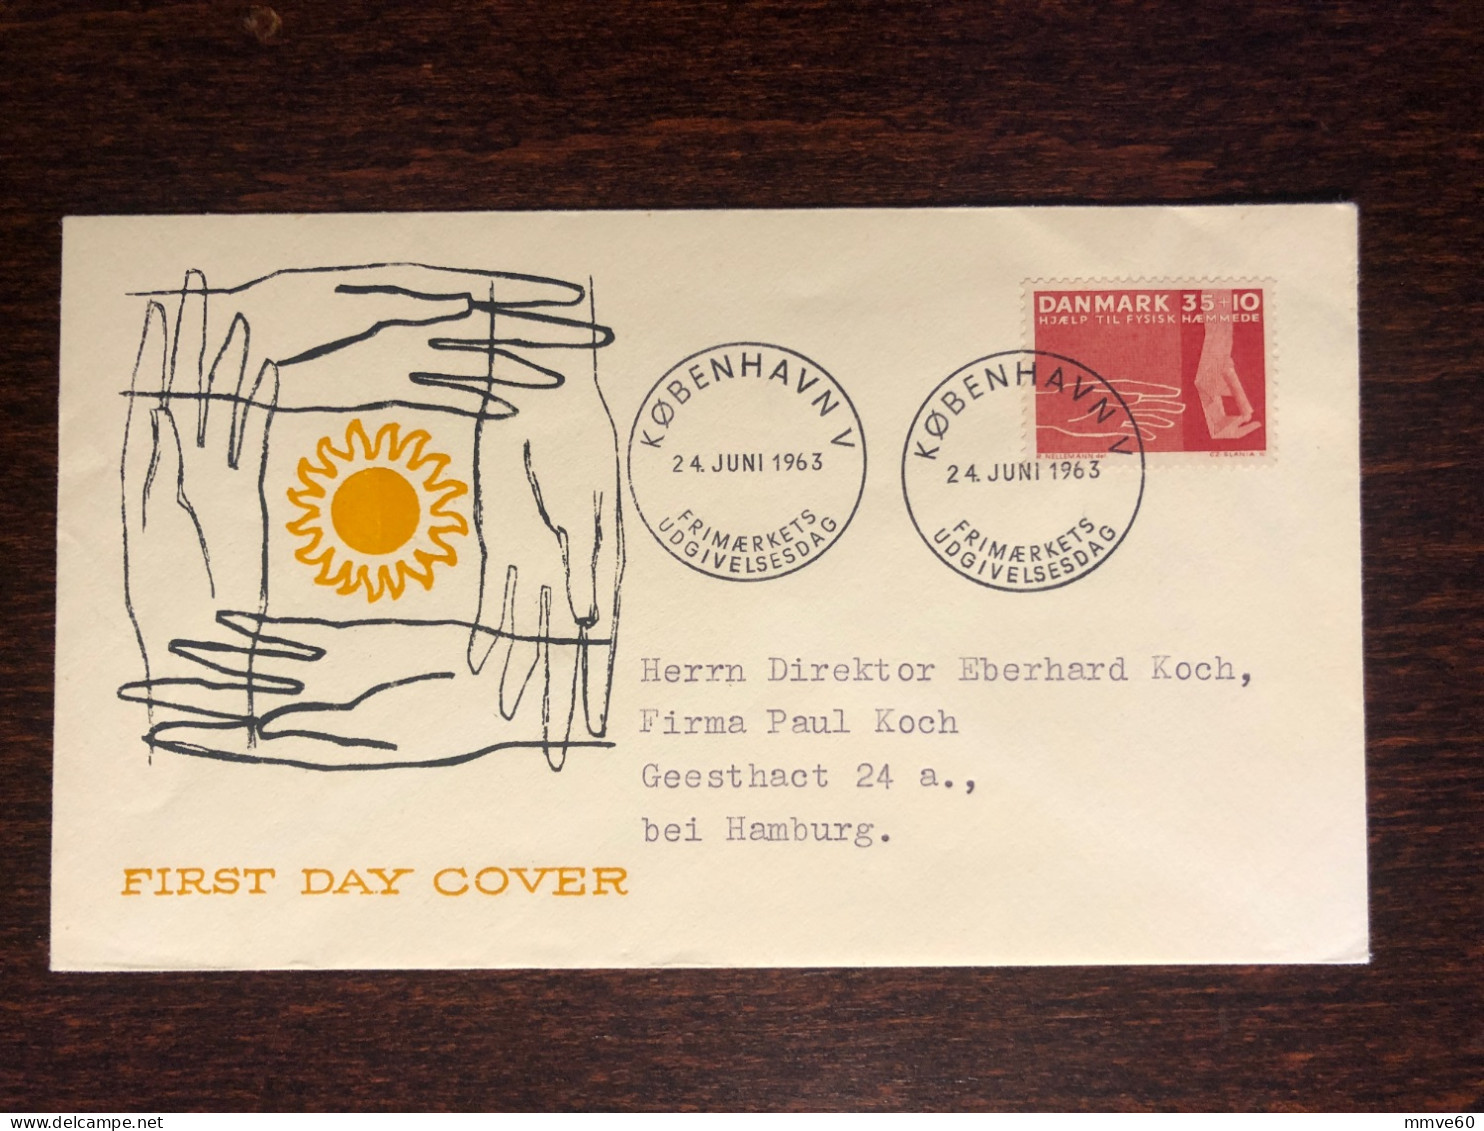 DENMARK FDC COVER 1963 YEAR DISABLED PEOPLE HEALTH MEDICINE STAMPS - FDC